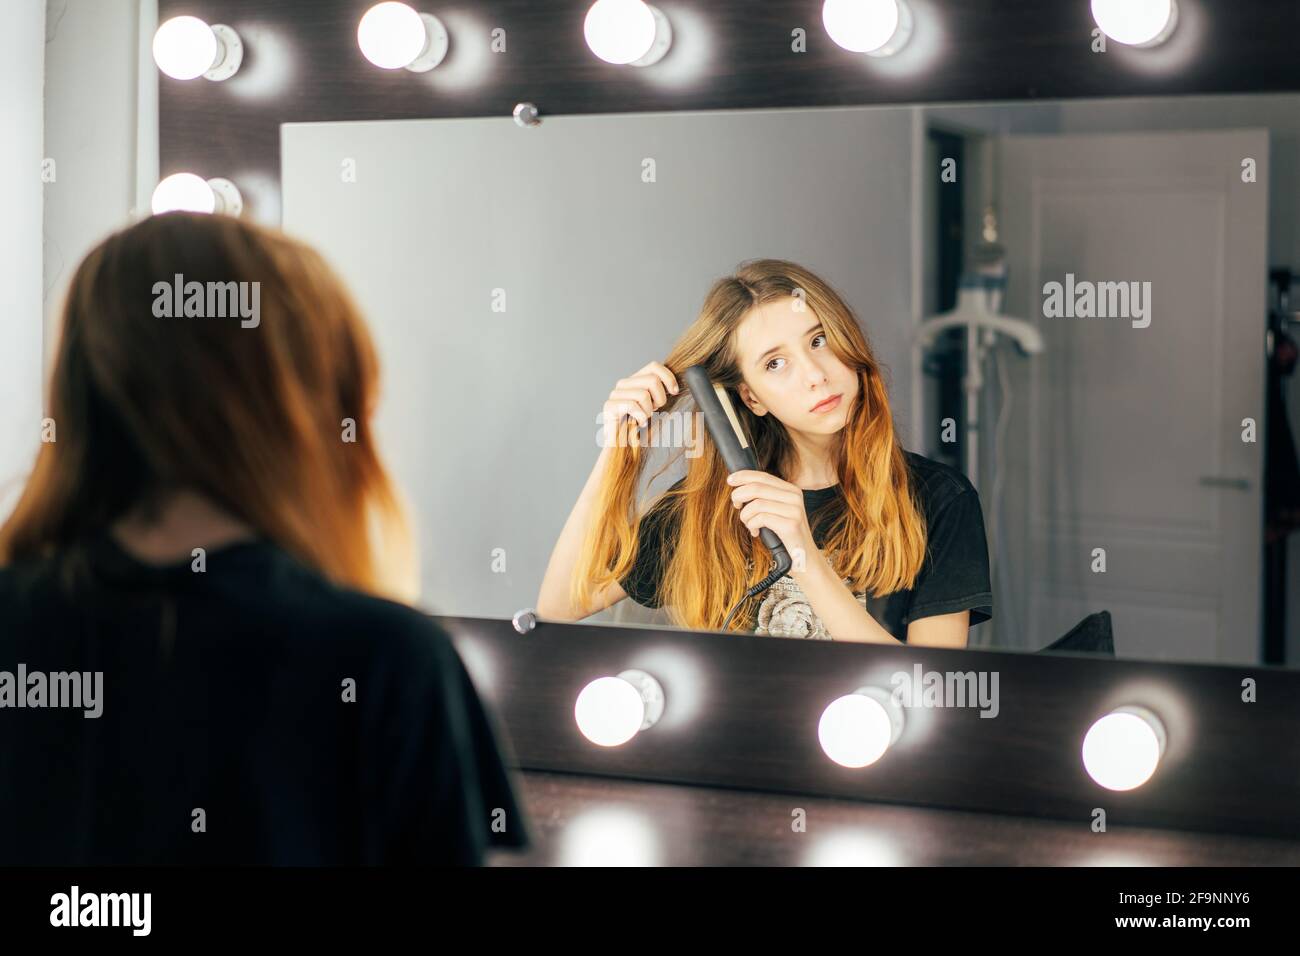 Young cute girl teen using a hair straightener on her wavy red hair Stock Photo